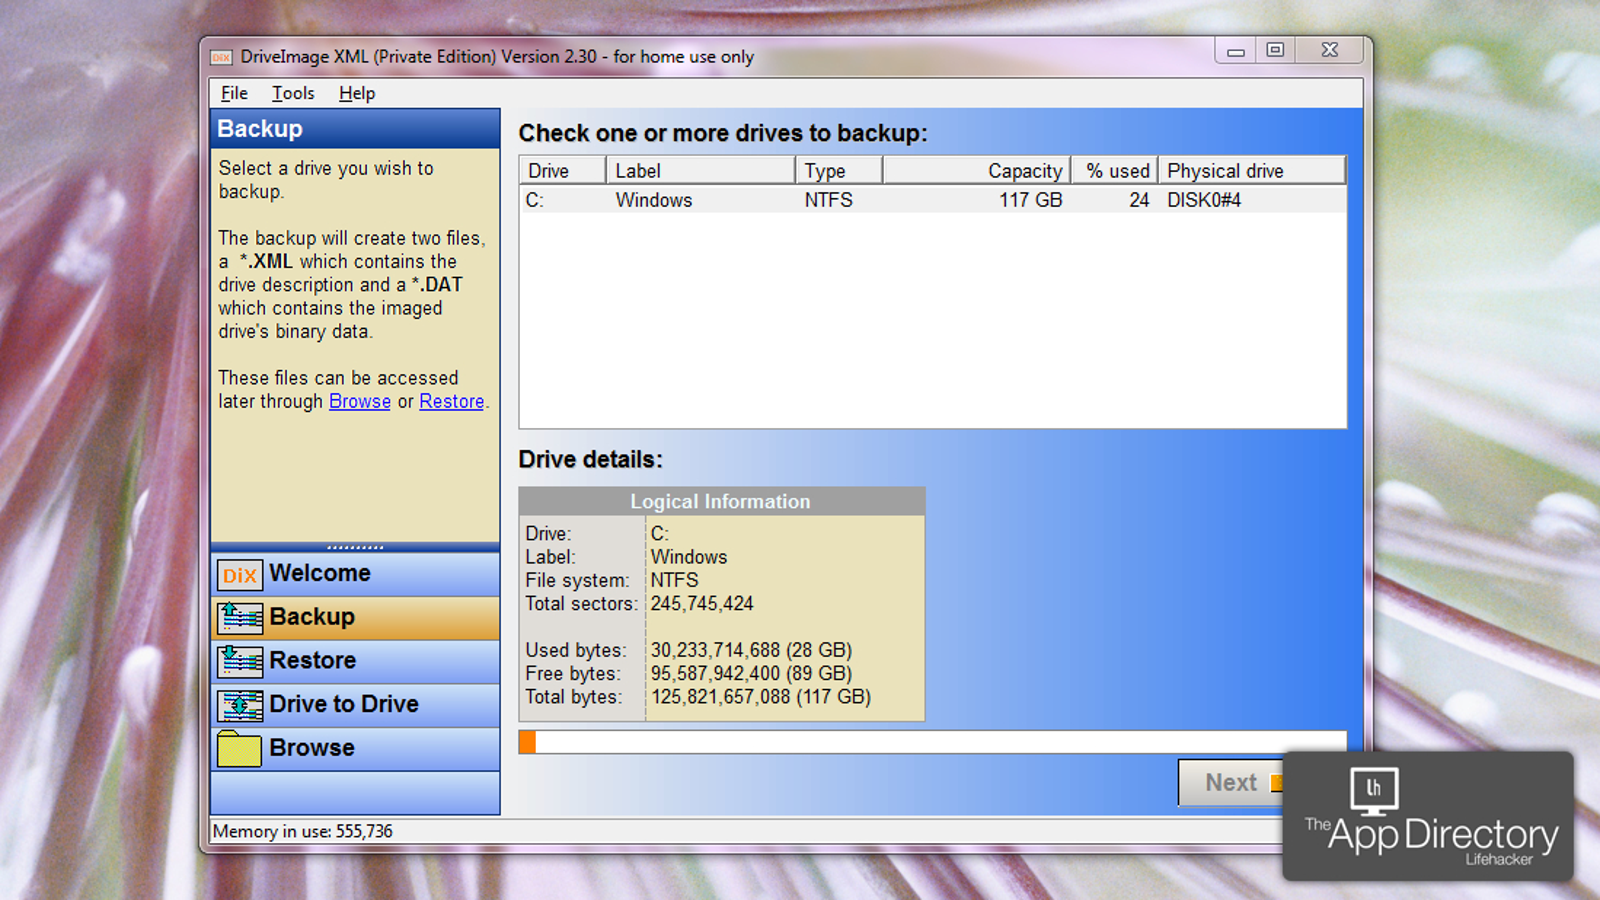 the best free hard drive cloning software